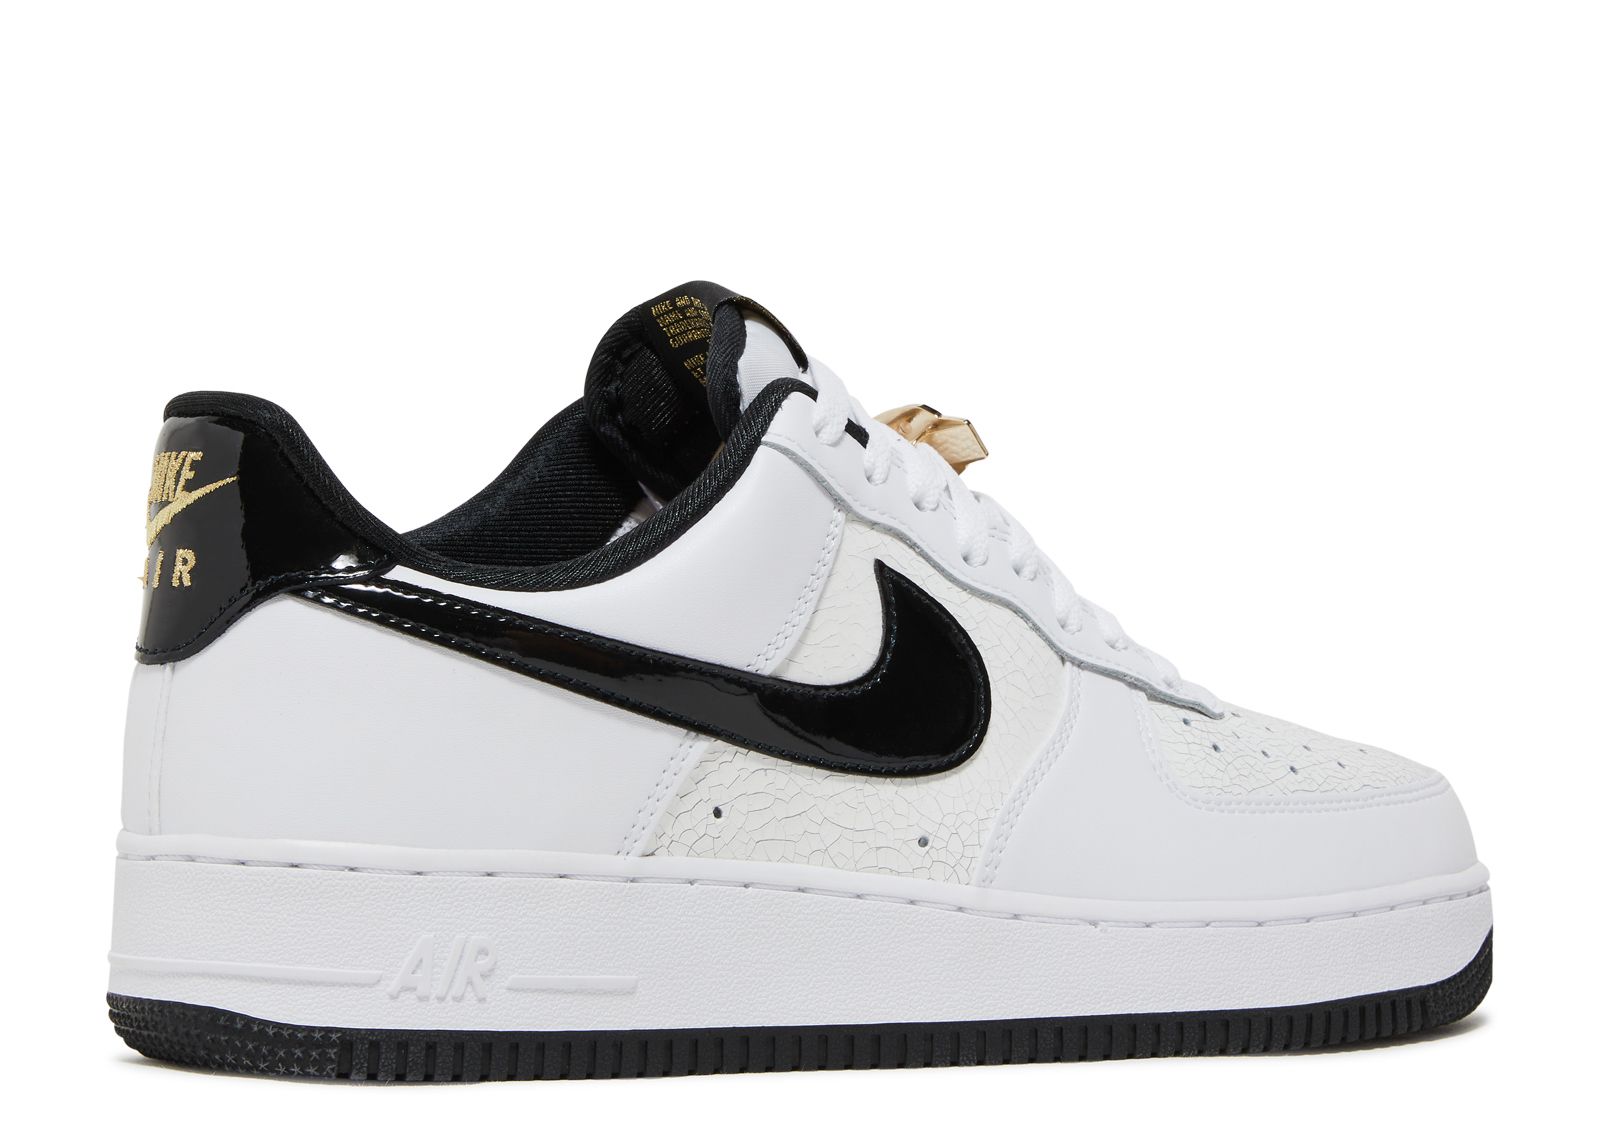 Nike Air Force 1 Low World Champ DR9866-100